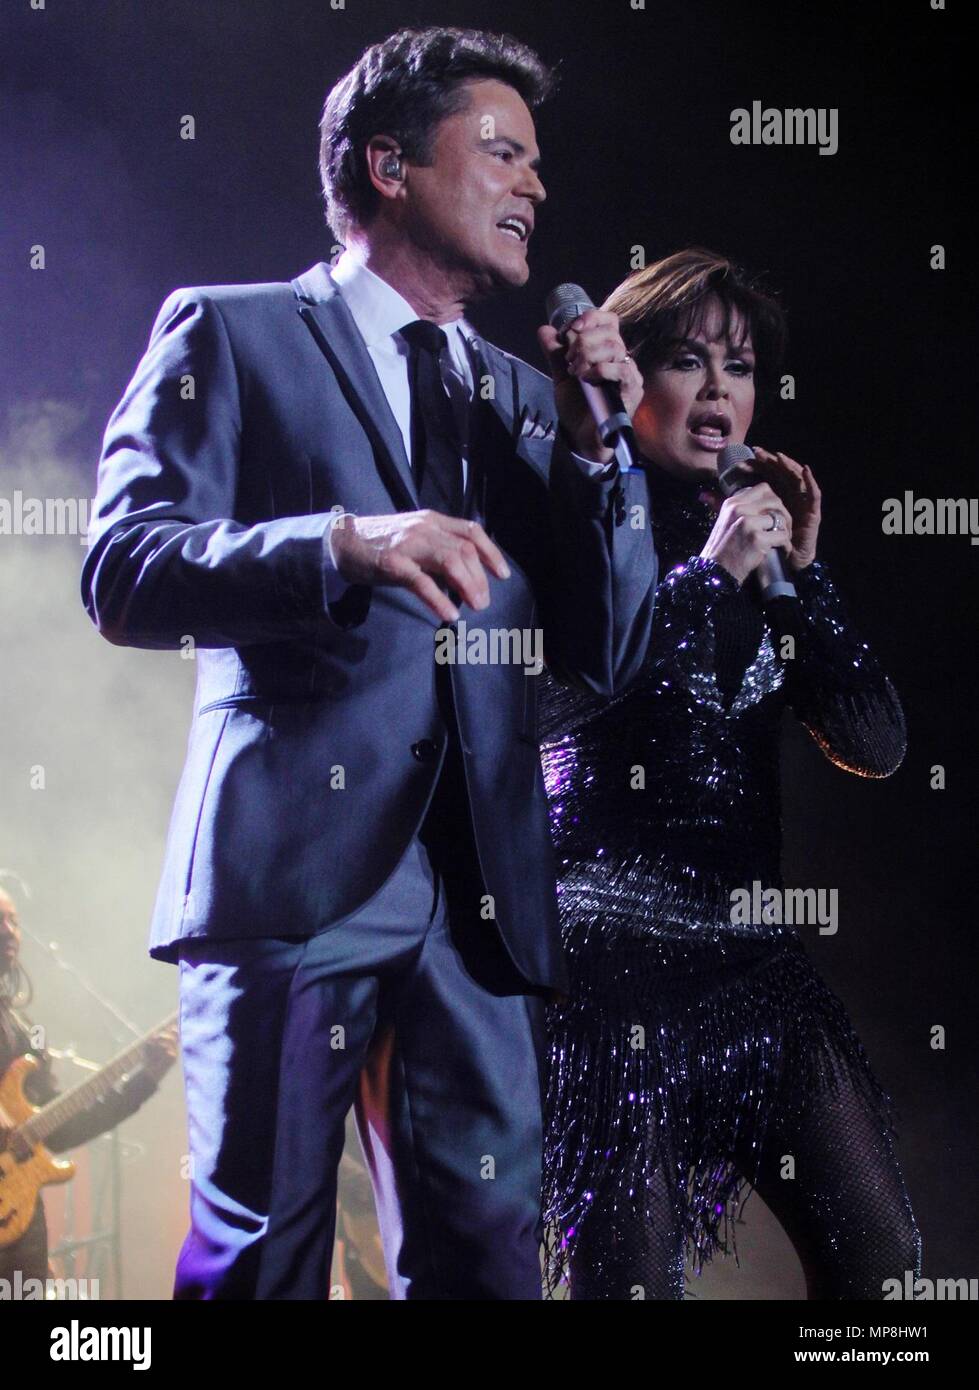 donny-and-marie-osmond--liverpool-echo-arena-credit Ian Fairbrother/Alamy Stock Photo